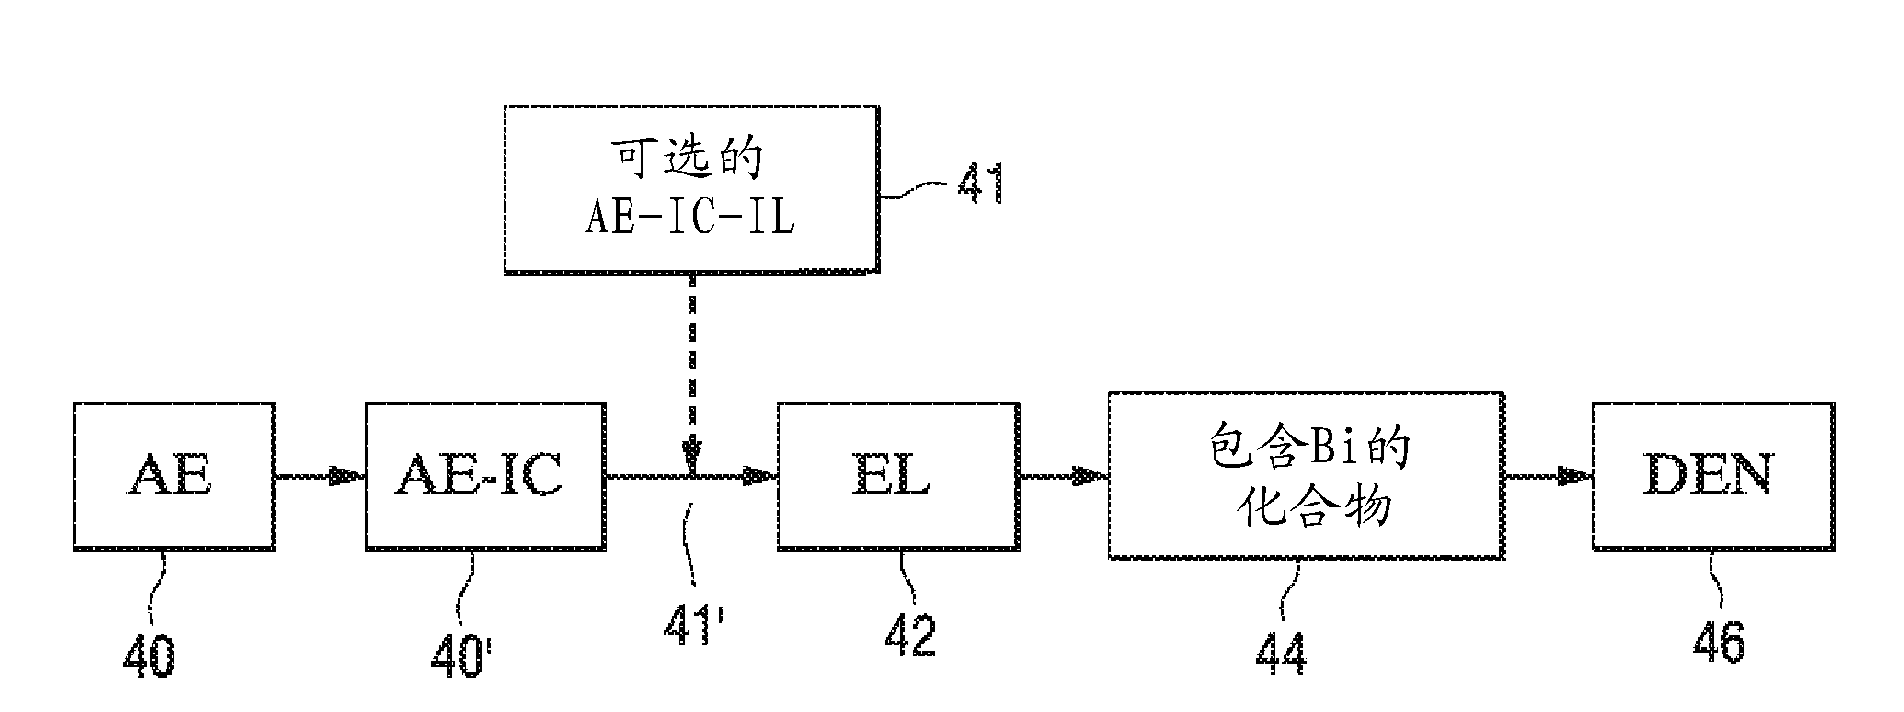 Bi containing solid oxide fuel cell system with improved performance and reduced manufacturing costs